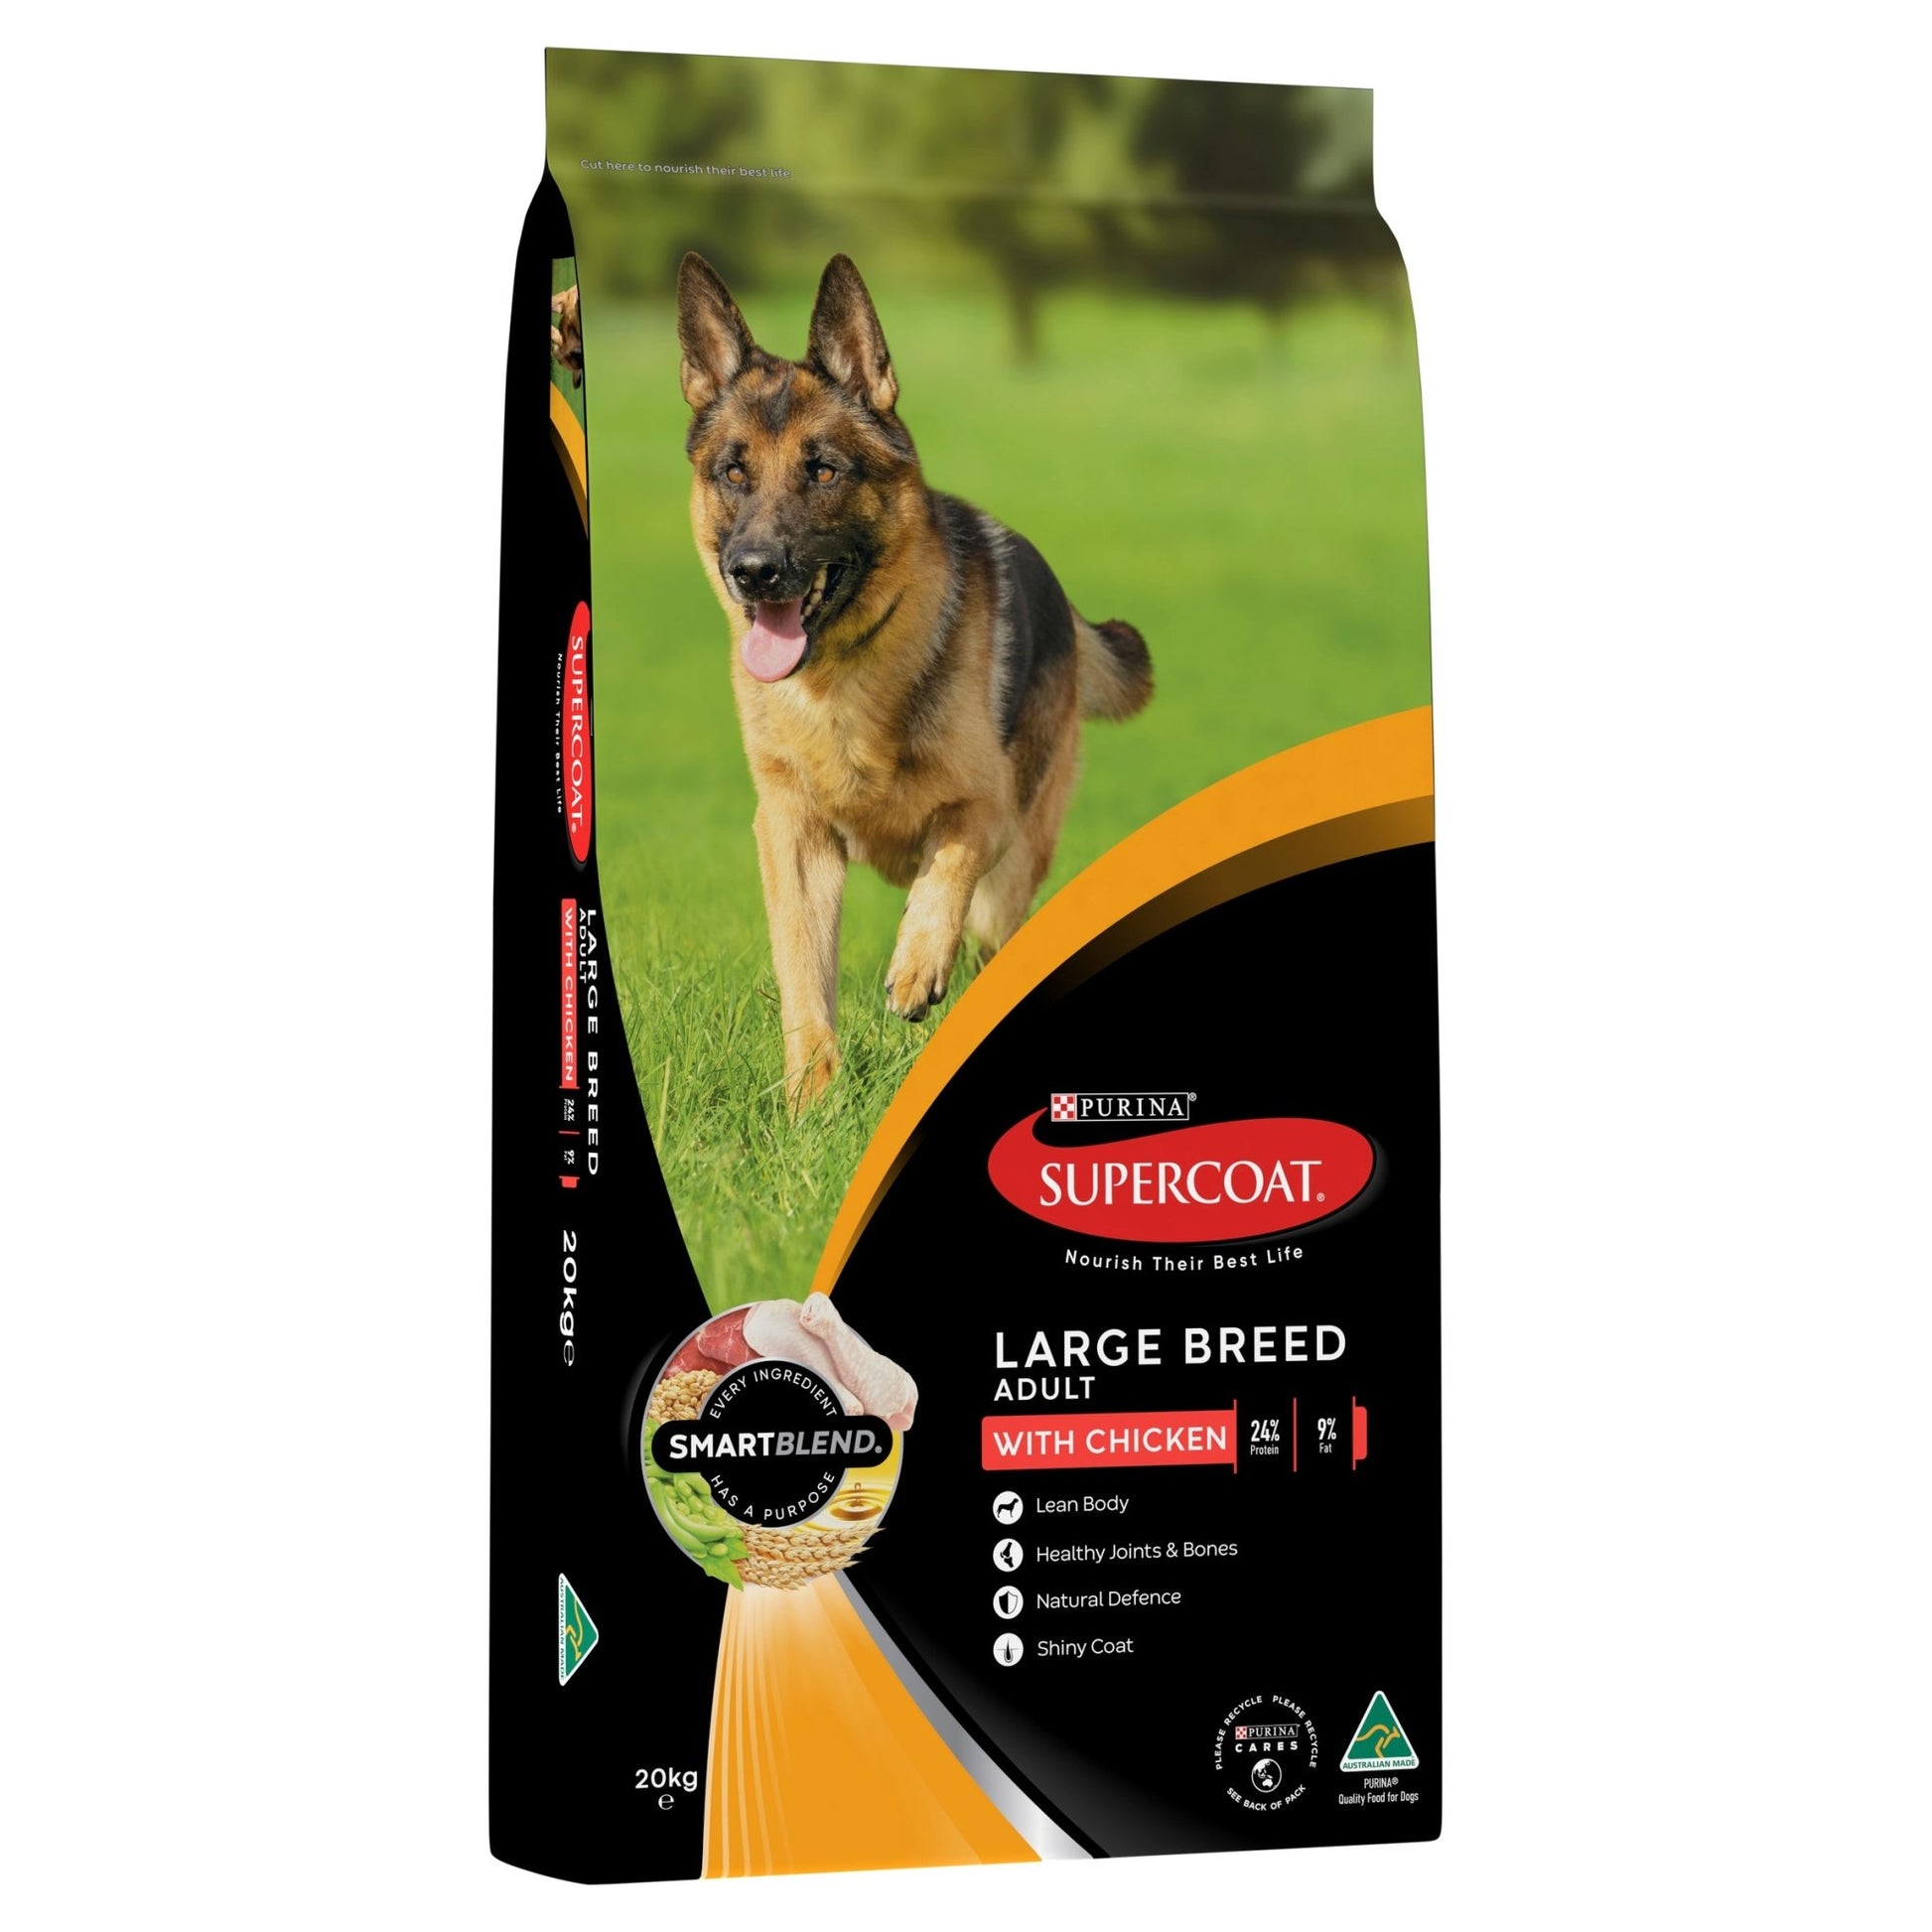 Supercoat Adult Large Breed Chicken 20kg - Woonona Petfood & Produce